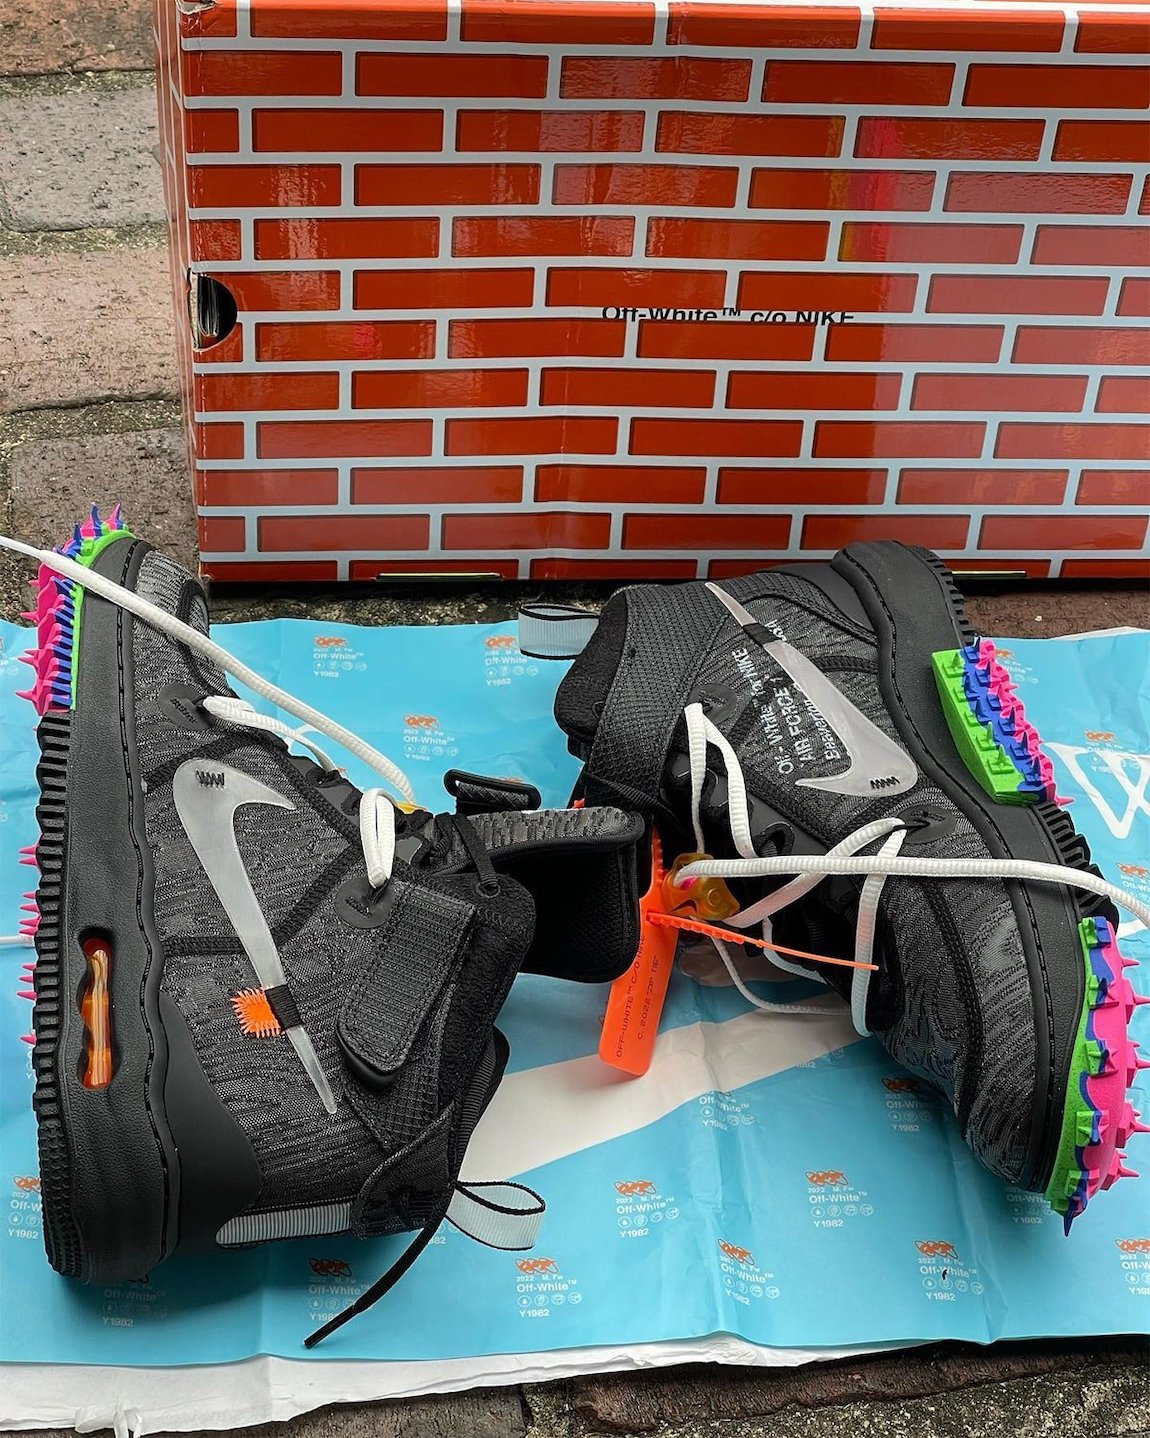 Off-White nike lunarglide 6 black and mint green sneaker Black DO6290-001 Release Date Pricing